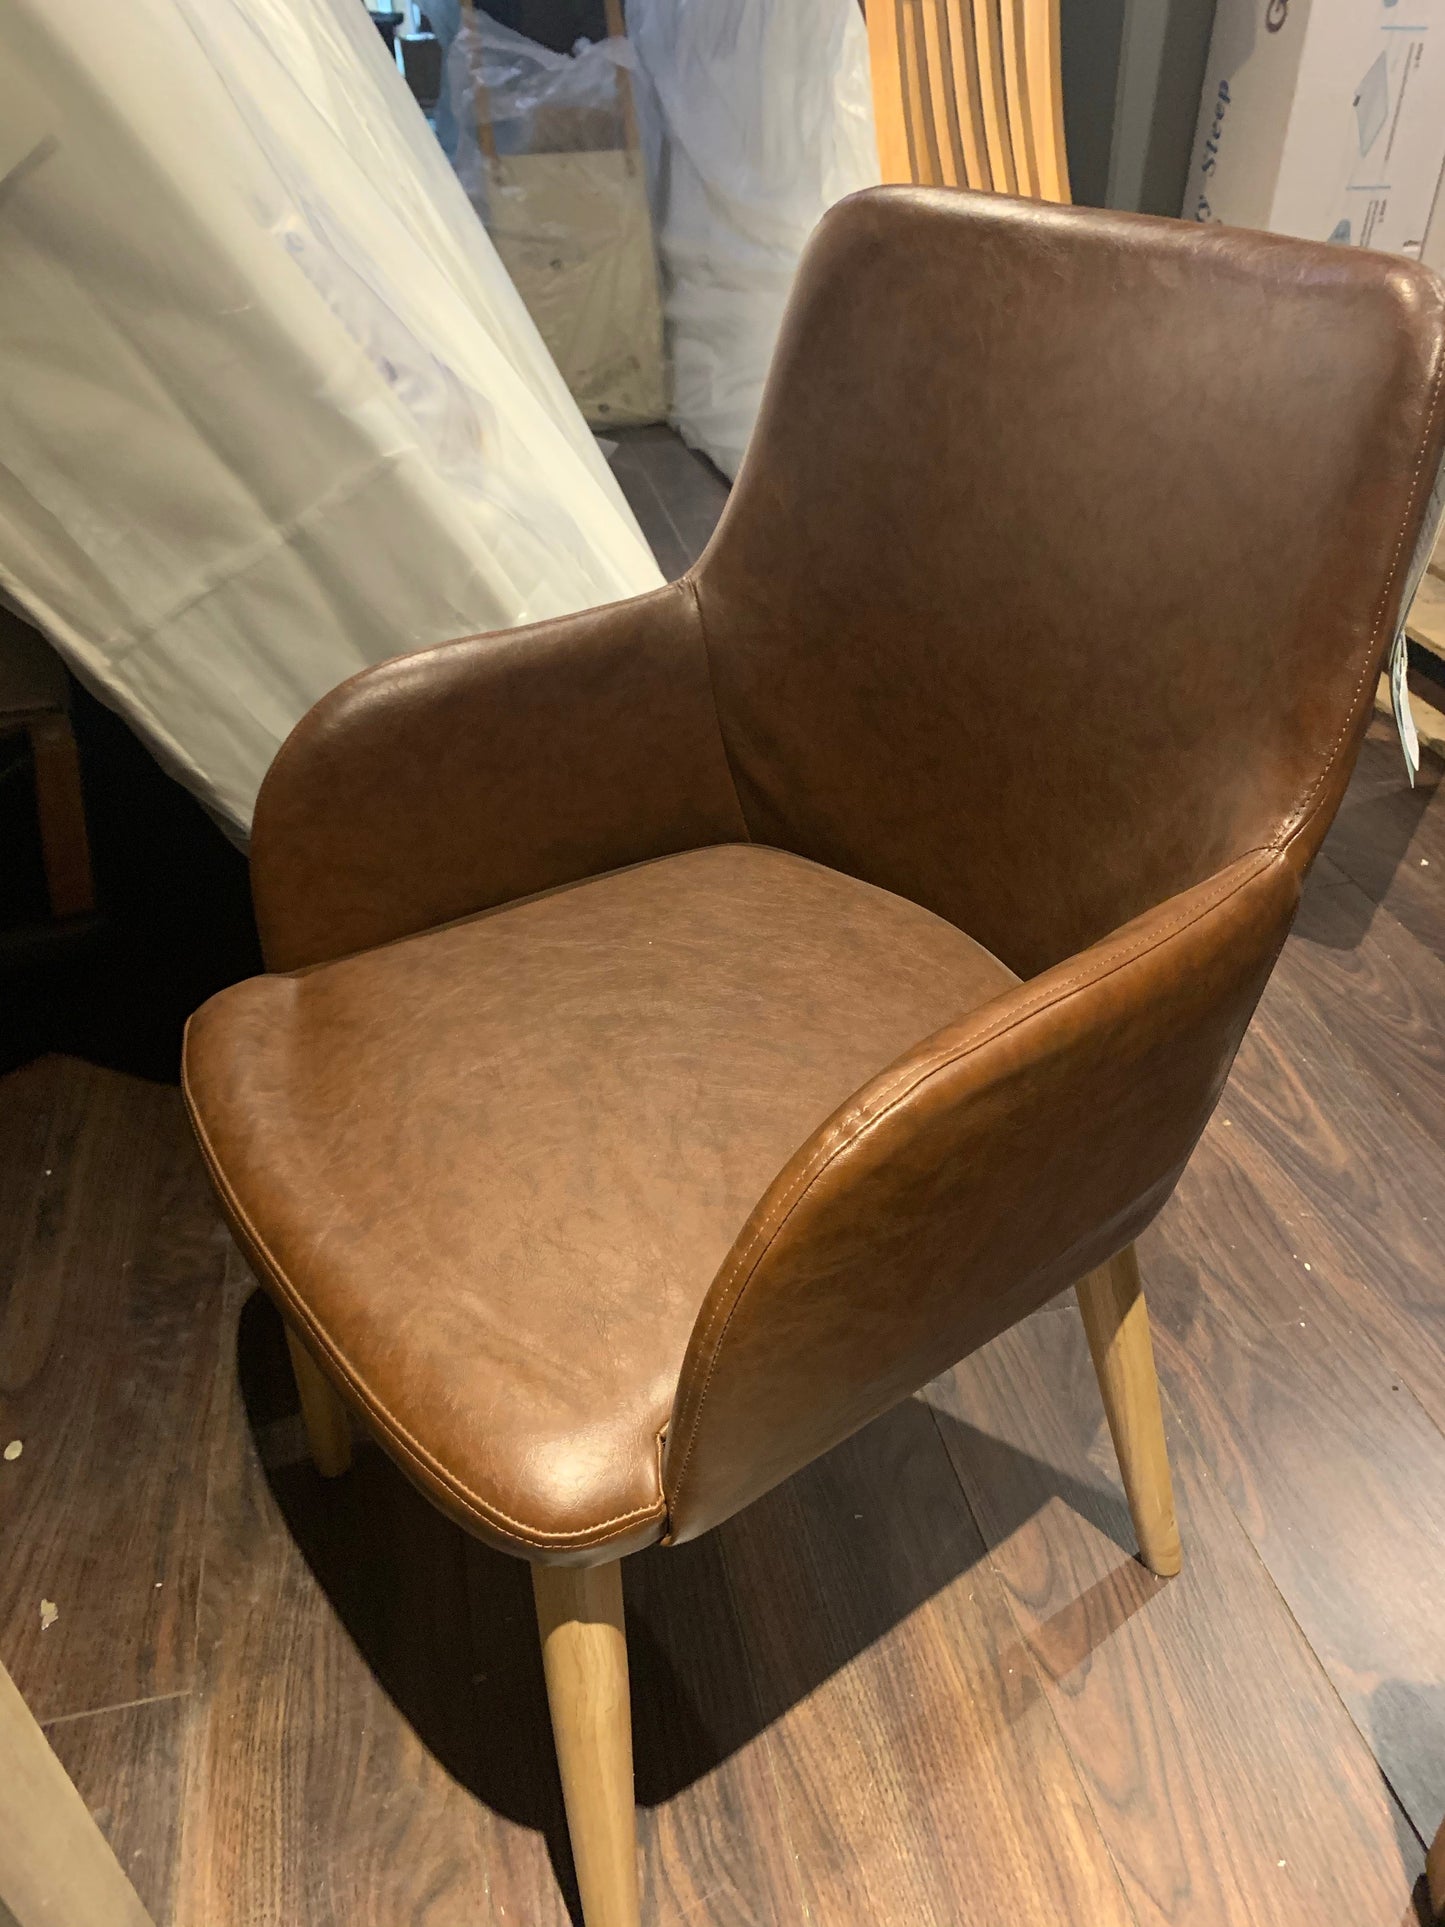 Set of Sidcup tan leather chairs  Half price click n collect